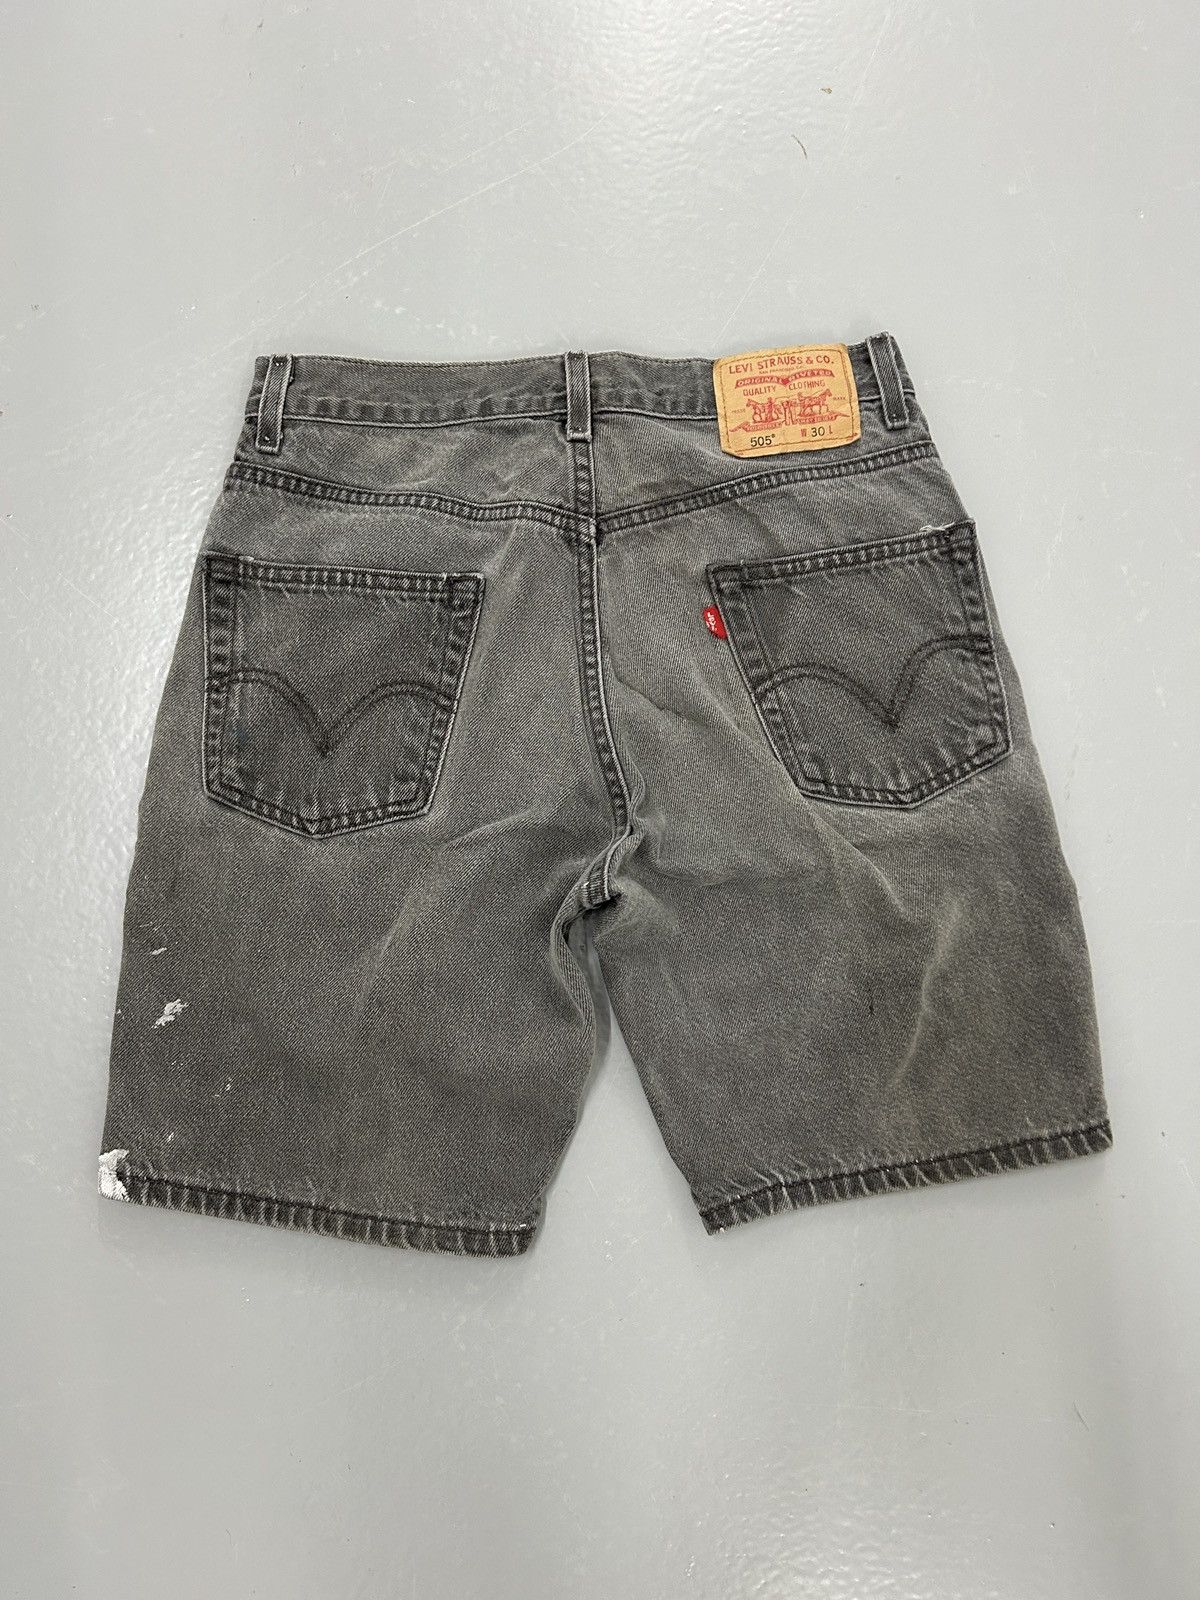 Pre-owned Levis X Vintage Crazy Vintage Levi's Faded Black 505 Jorts Faded Distressed